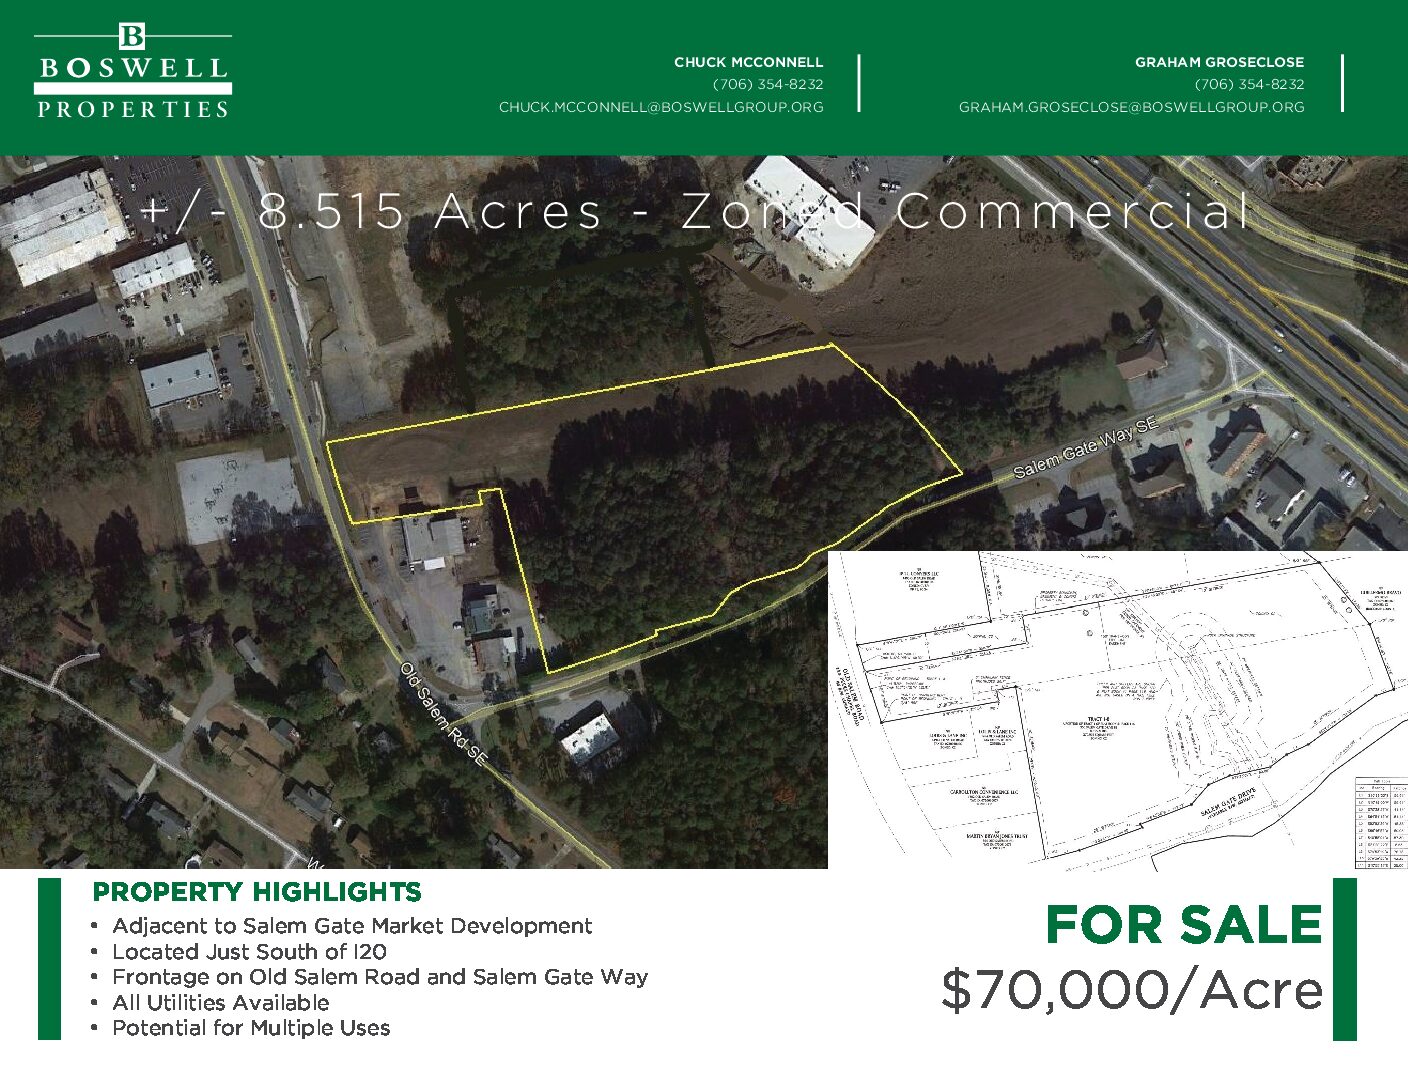 Rockdale County Commercial Land – Close to I-20